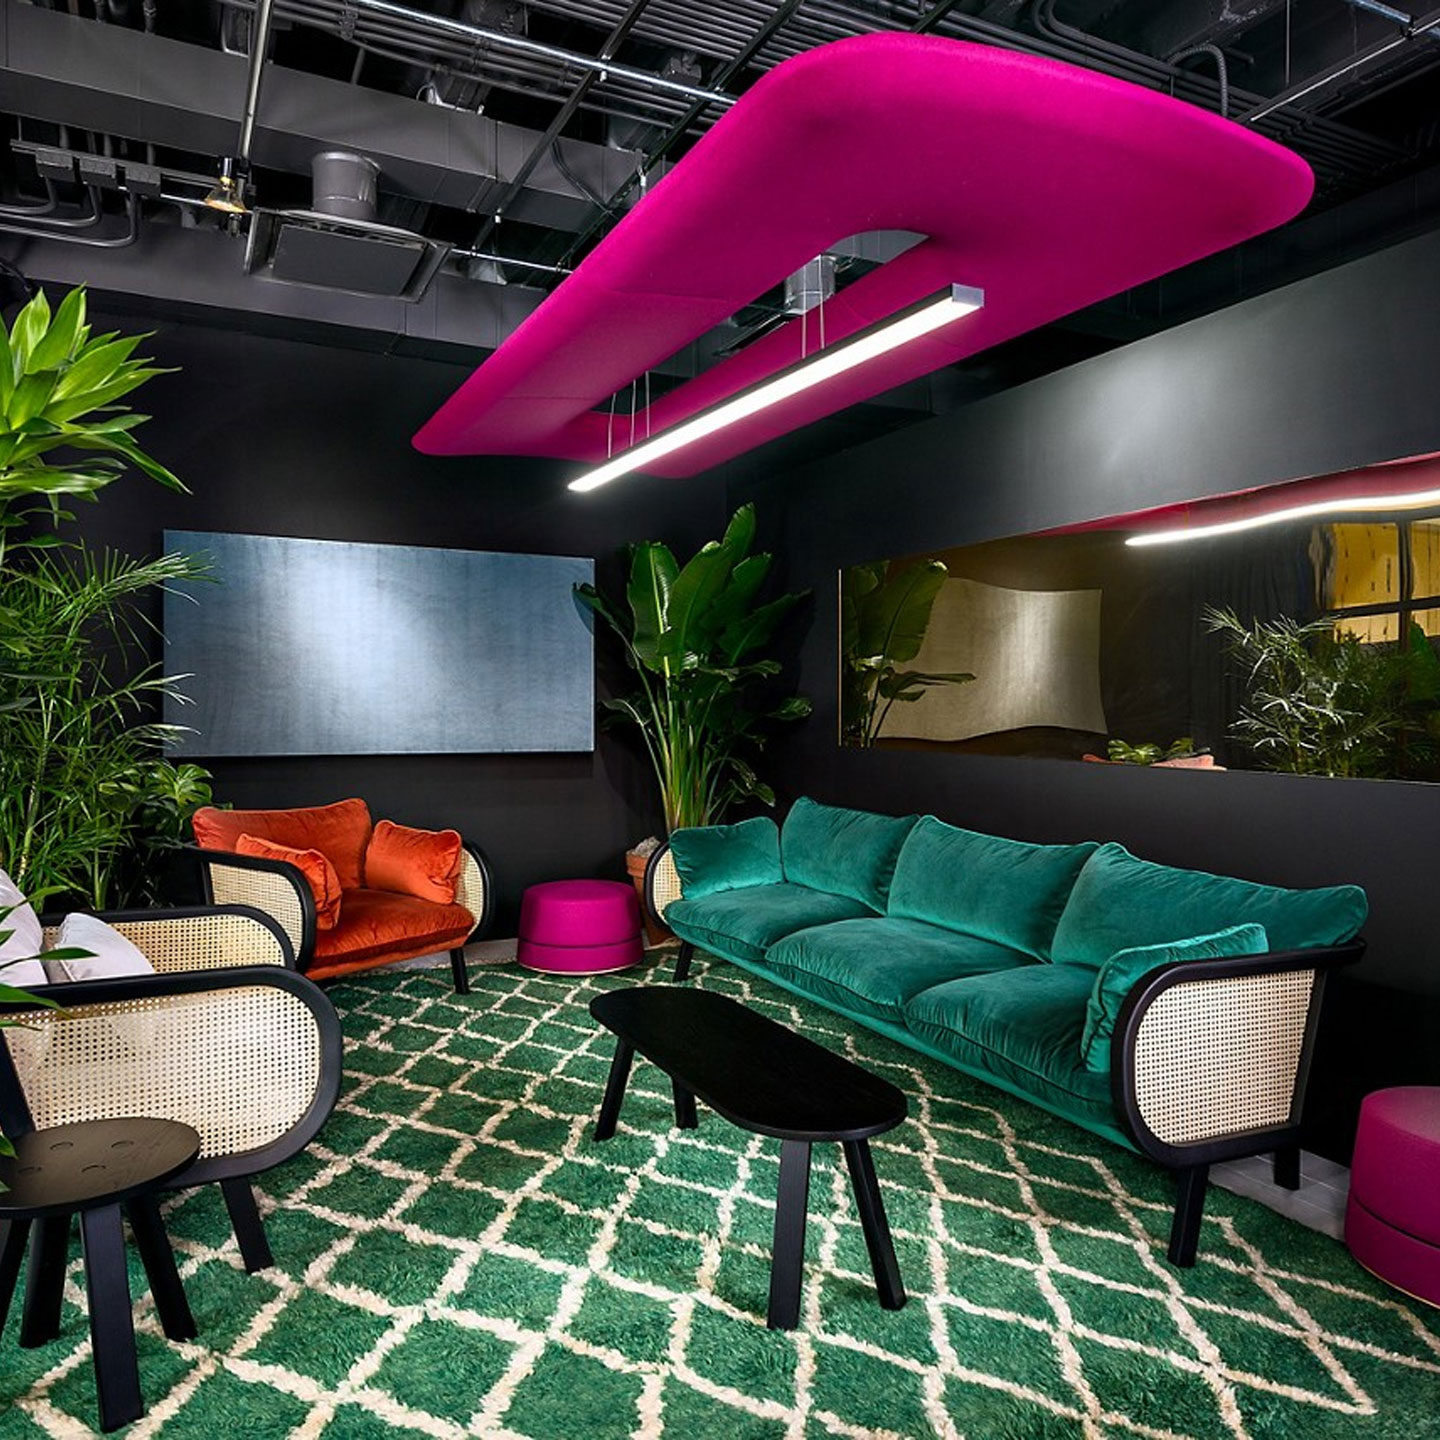 Haworth BuzziZepp Accessories in an office lounge area in a pink color 